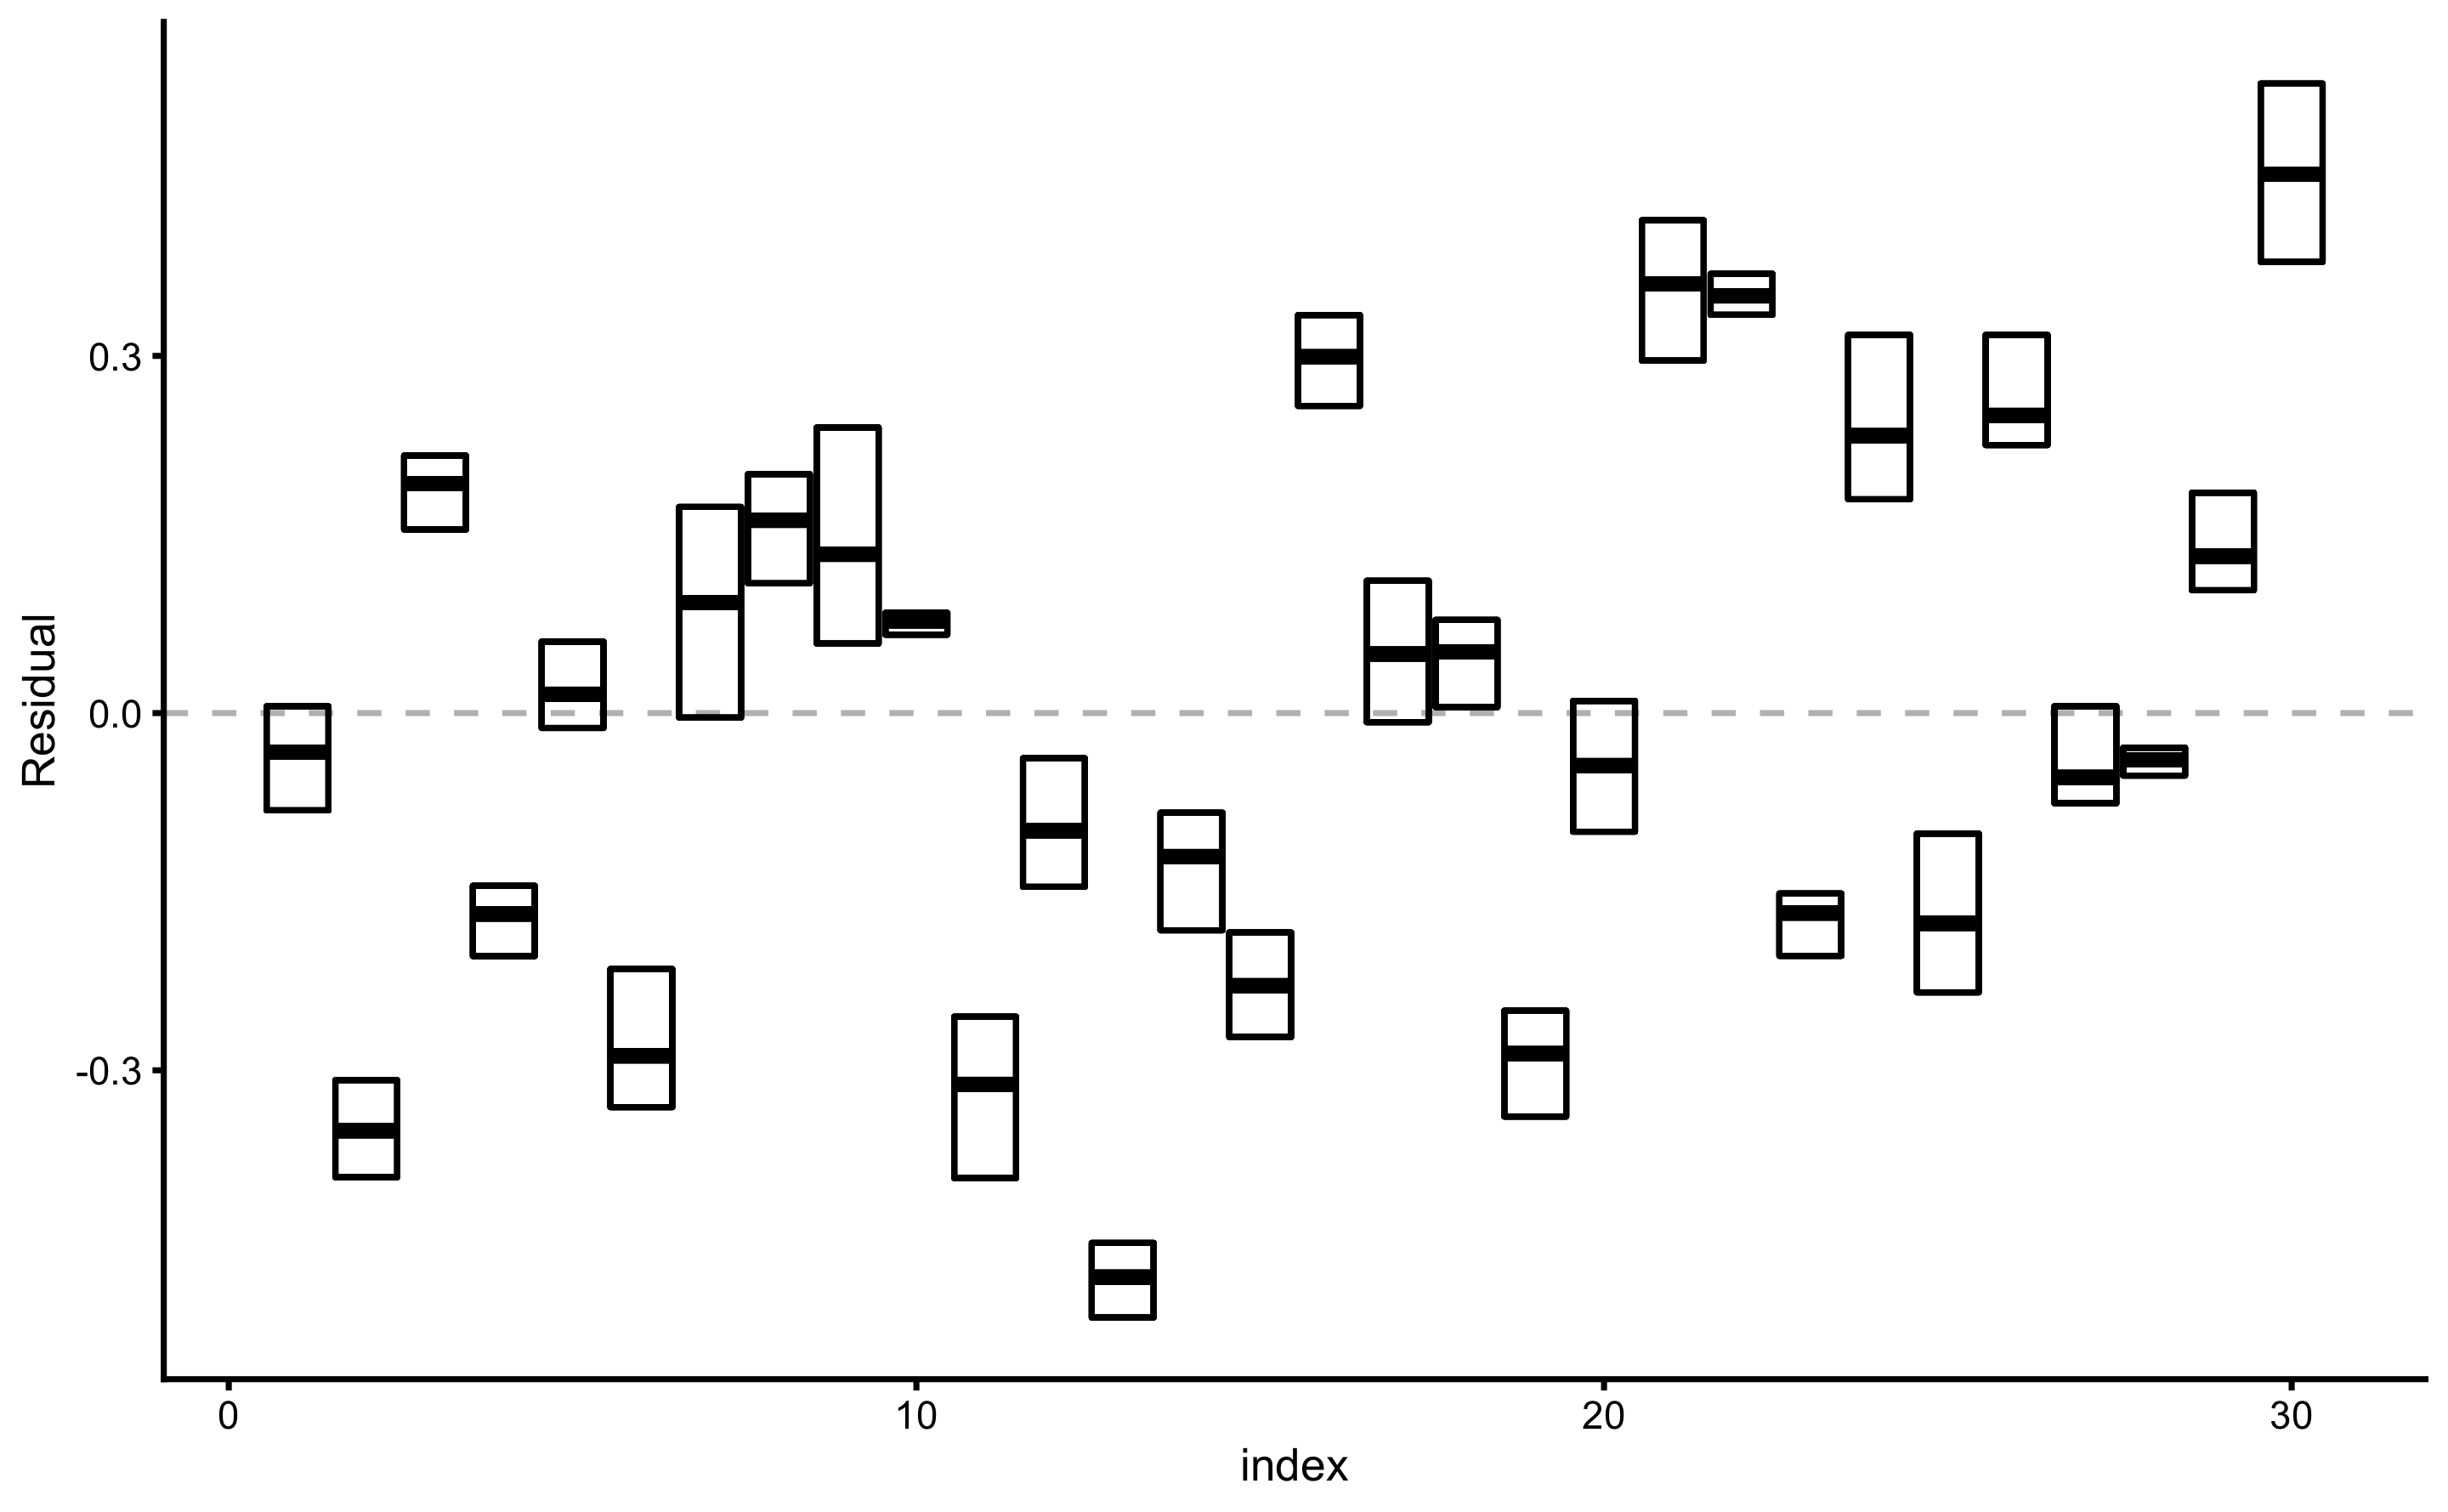 Testing prediction residuals across cross-validation folds summarized with cross-bars for every observation. Cross-bars represent ranges of testing residuals for each observation, while horizontal bar represent mean residual. The length of the bar represents \(Variance\), while distance between horizontal dashed line and horizontal line in the cross-bar (i.e. mean residual) represents \(Bias\).